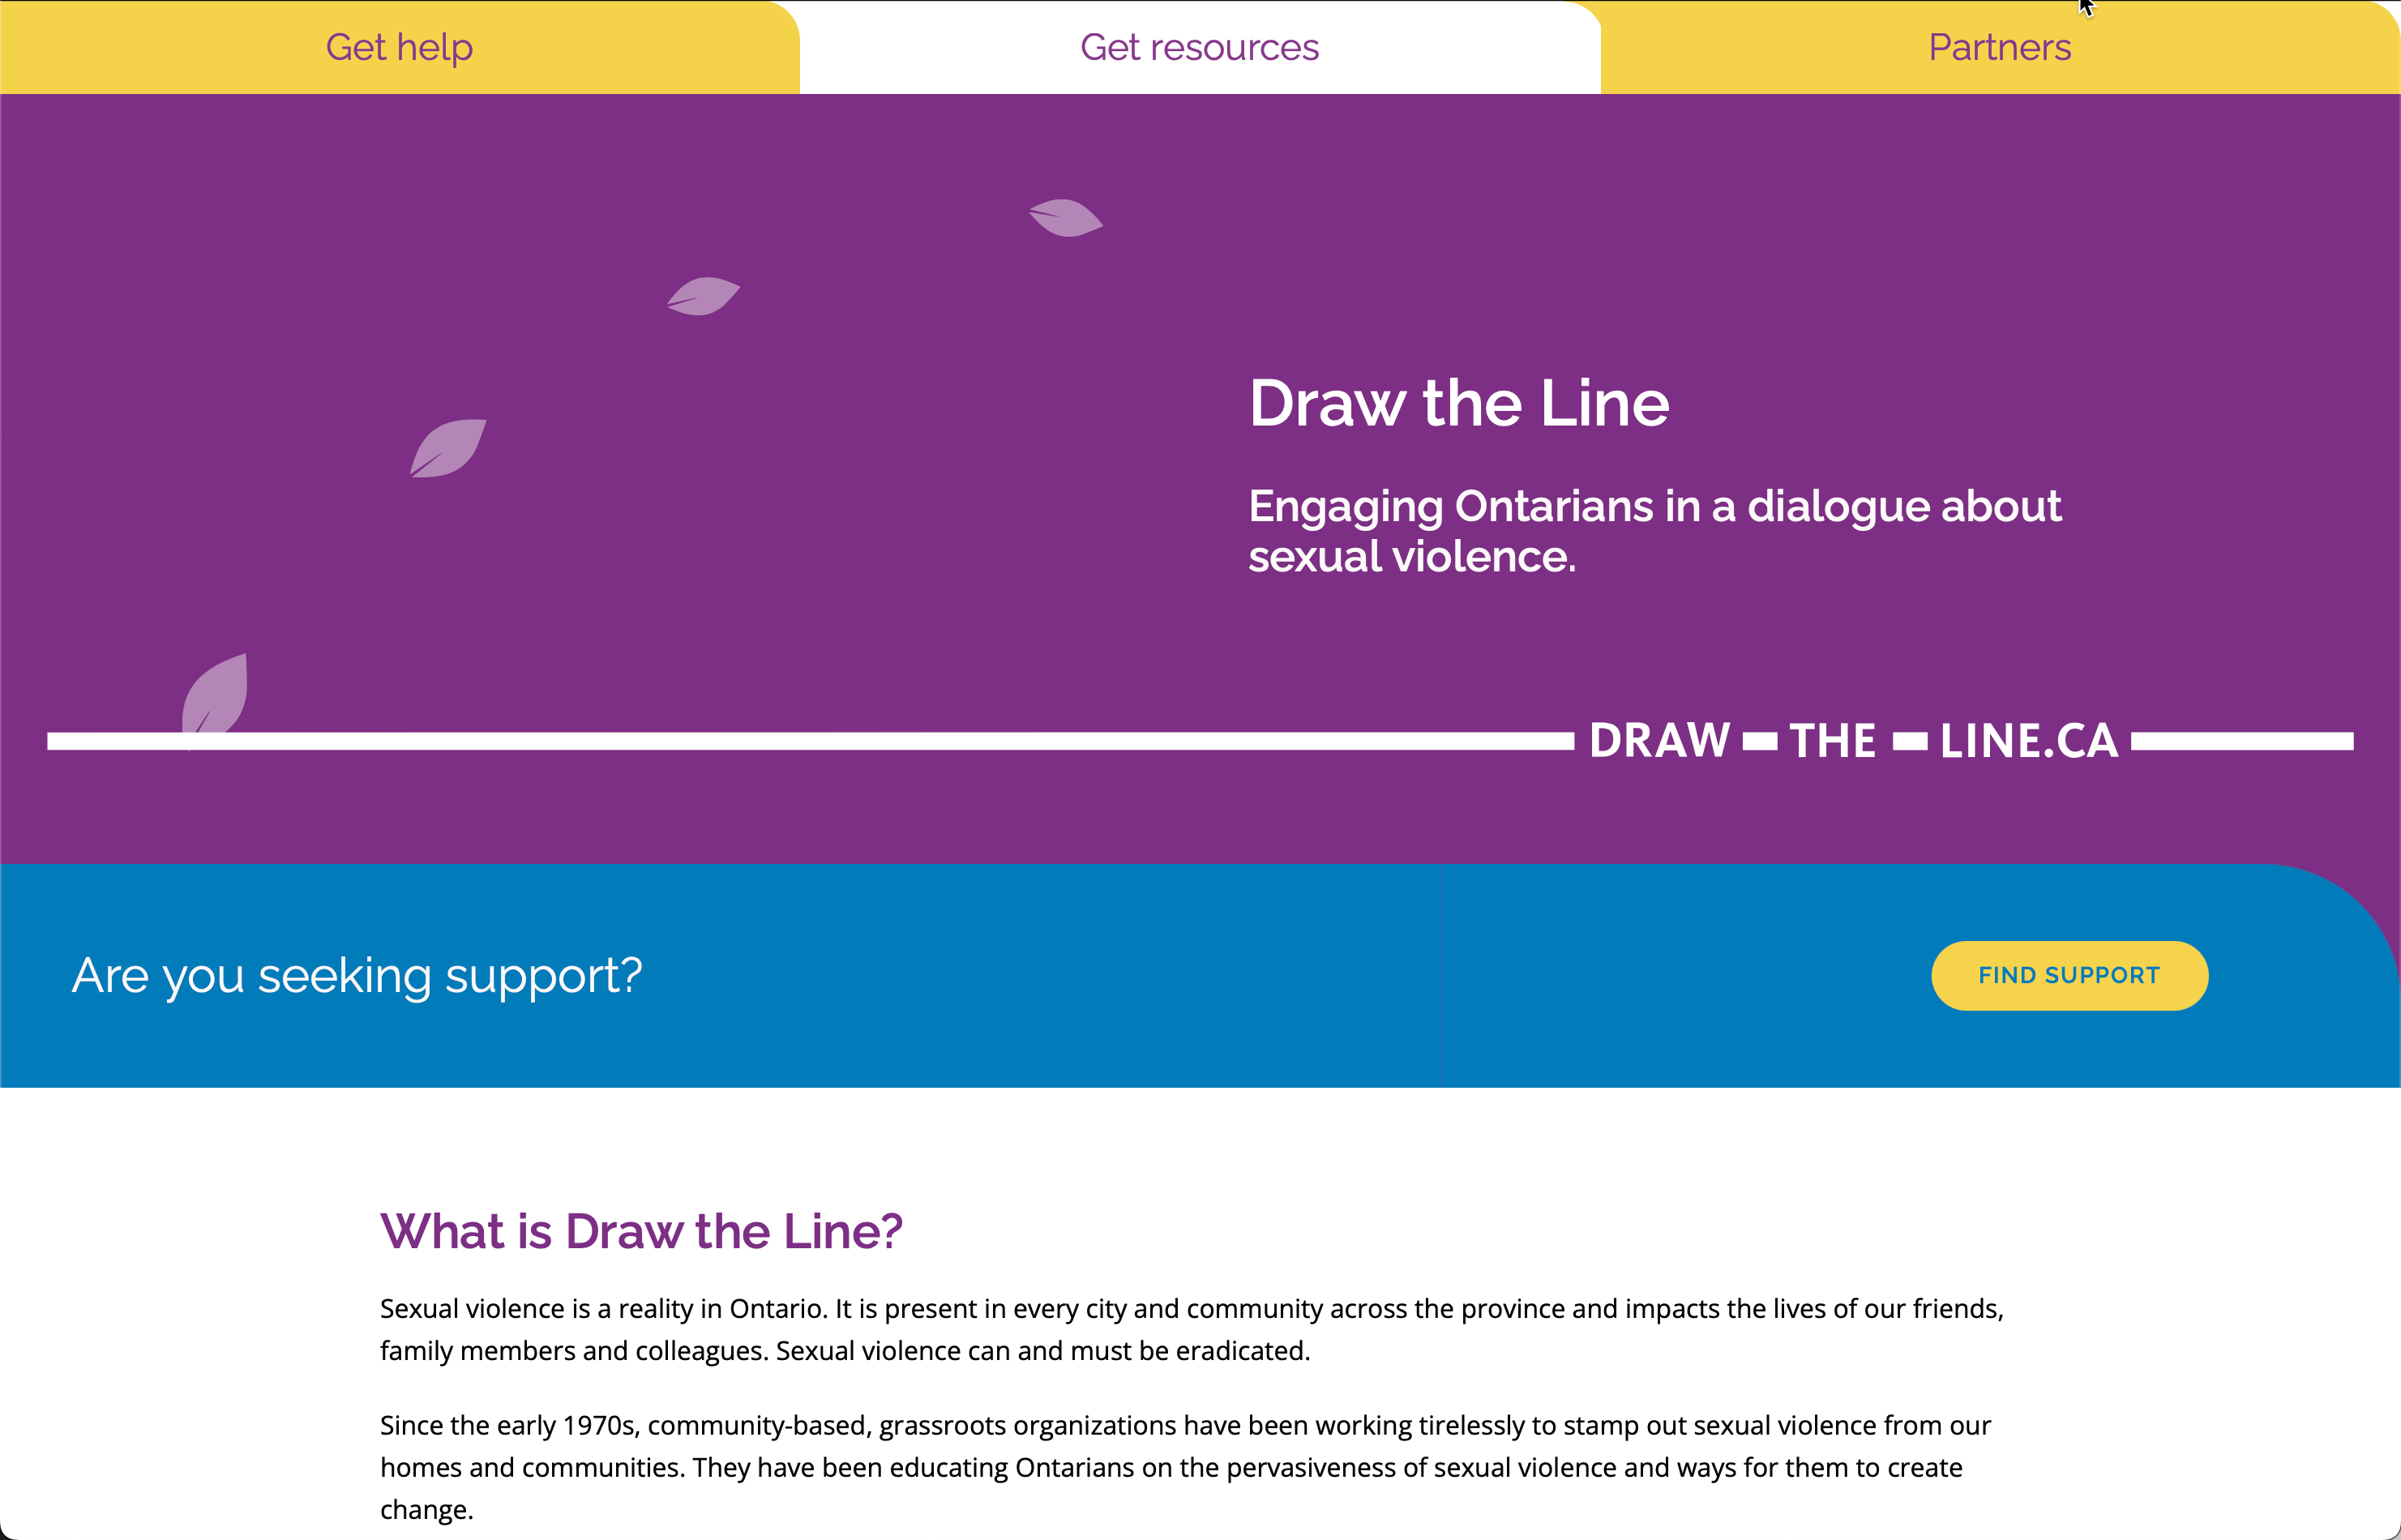 Draw the Line website screen capture of front page